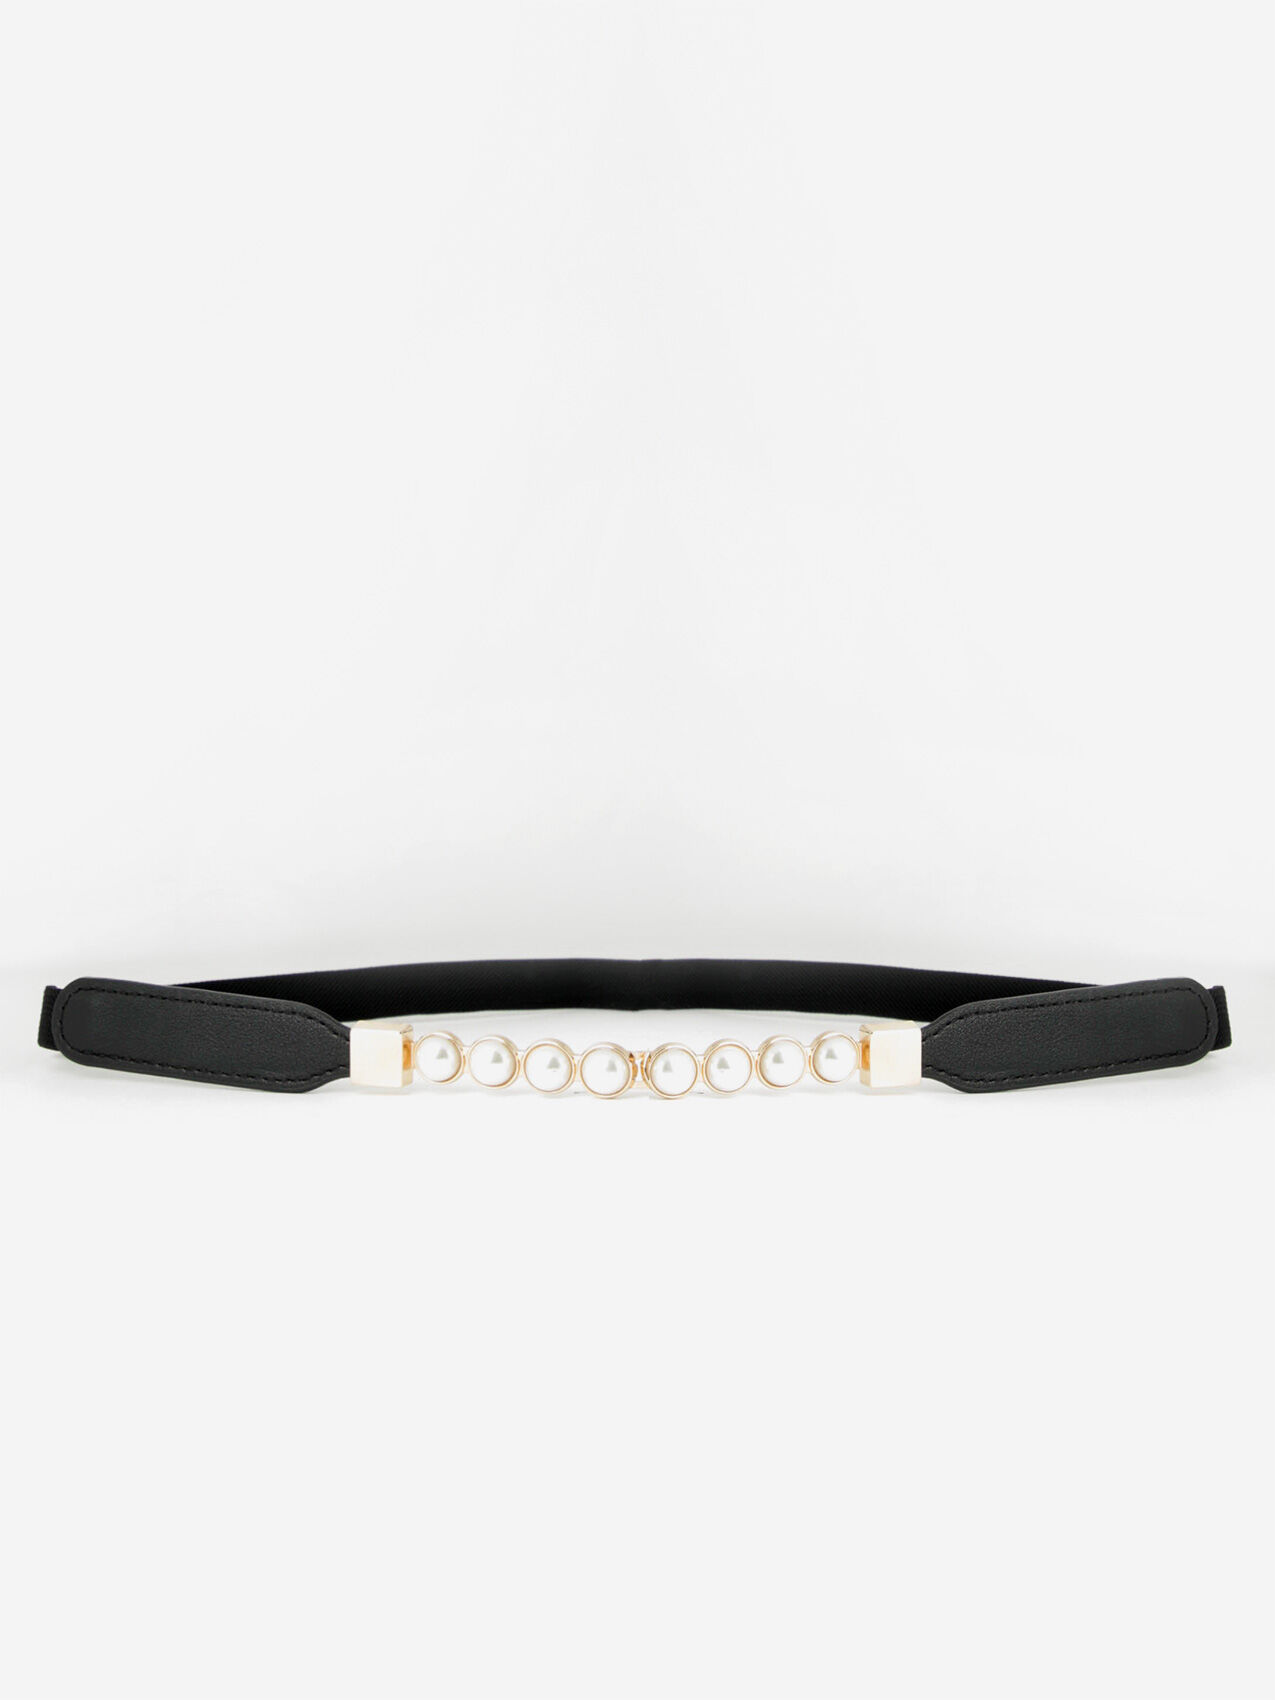 Skinny Stretch Belt with Pearl Buckle